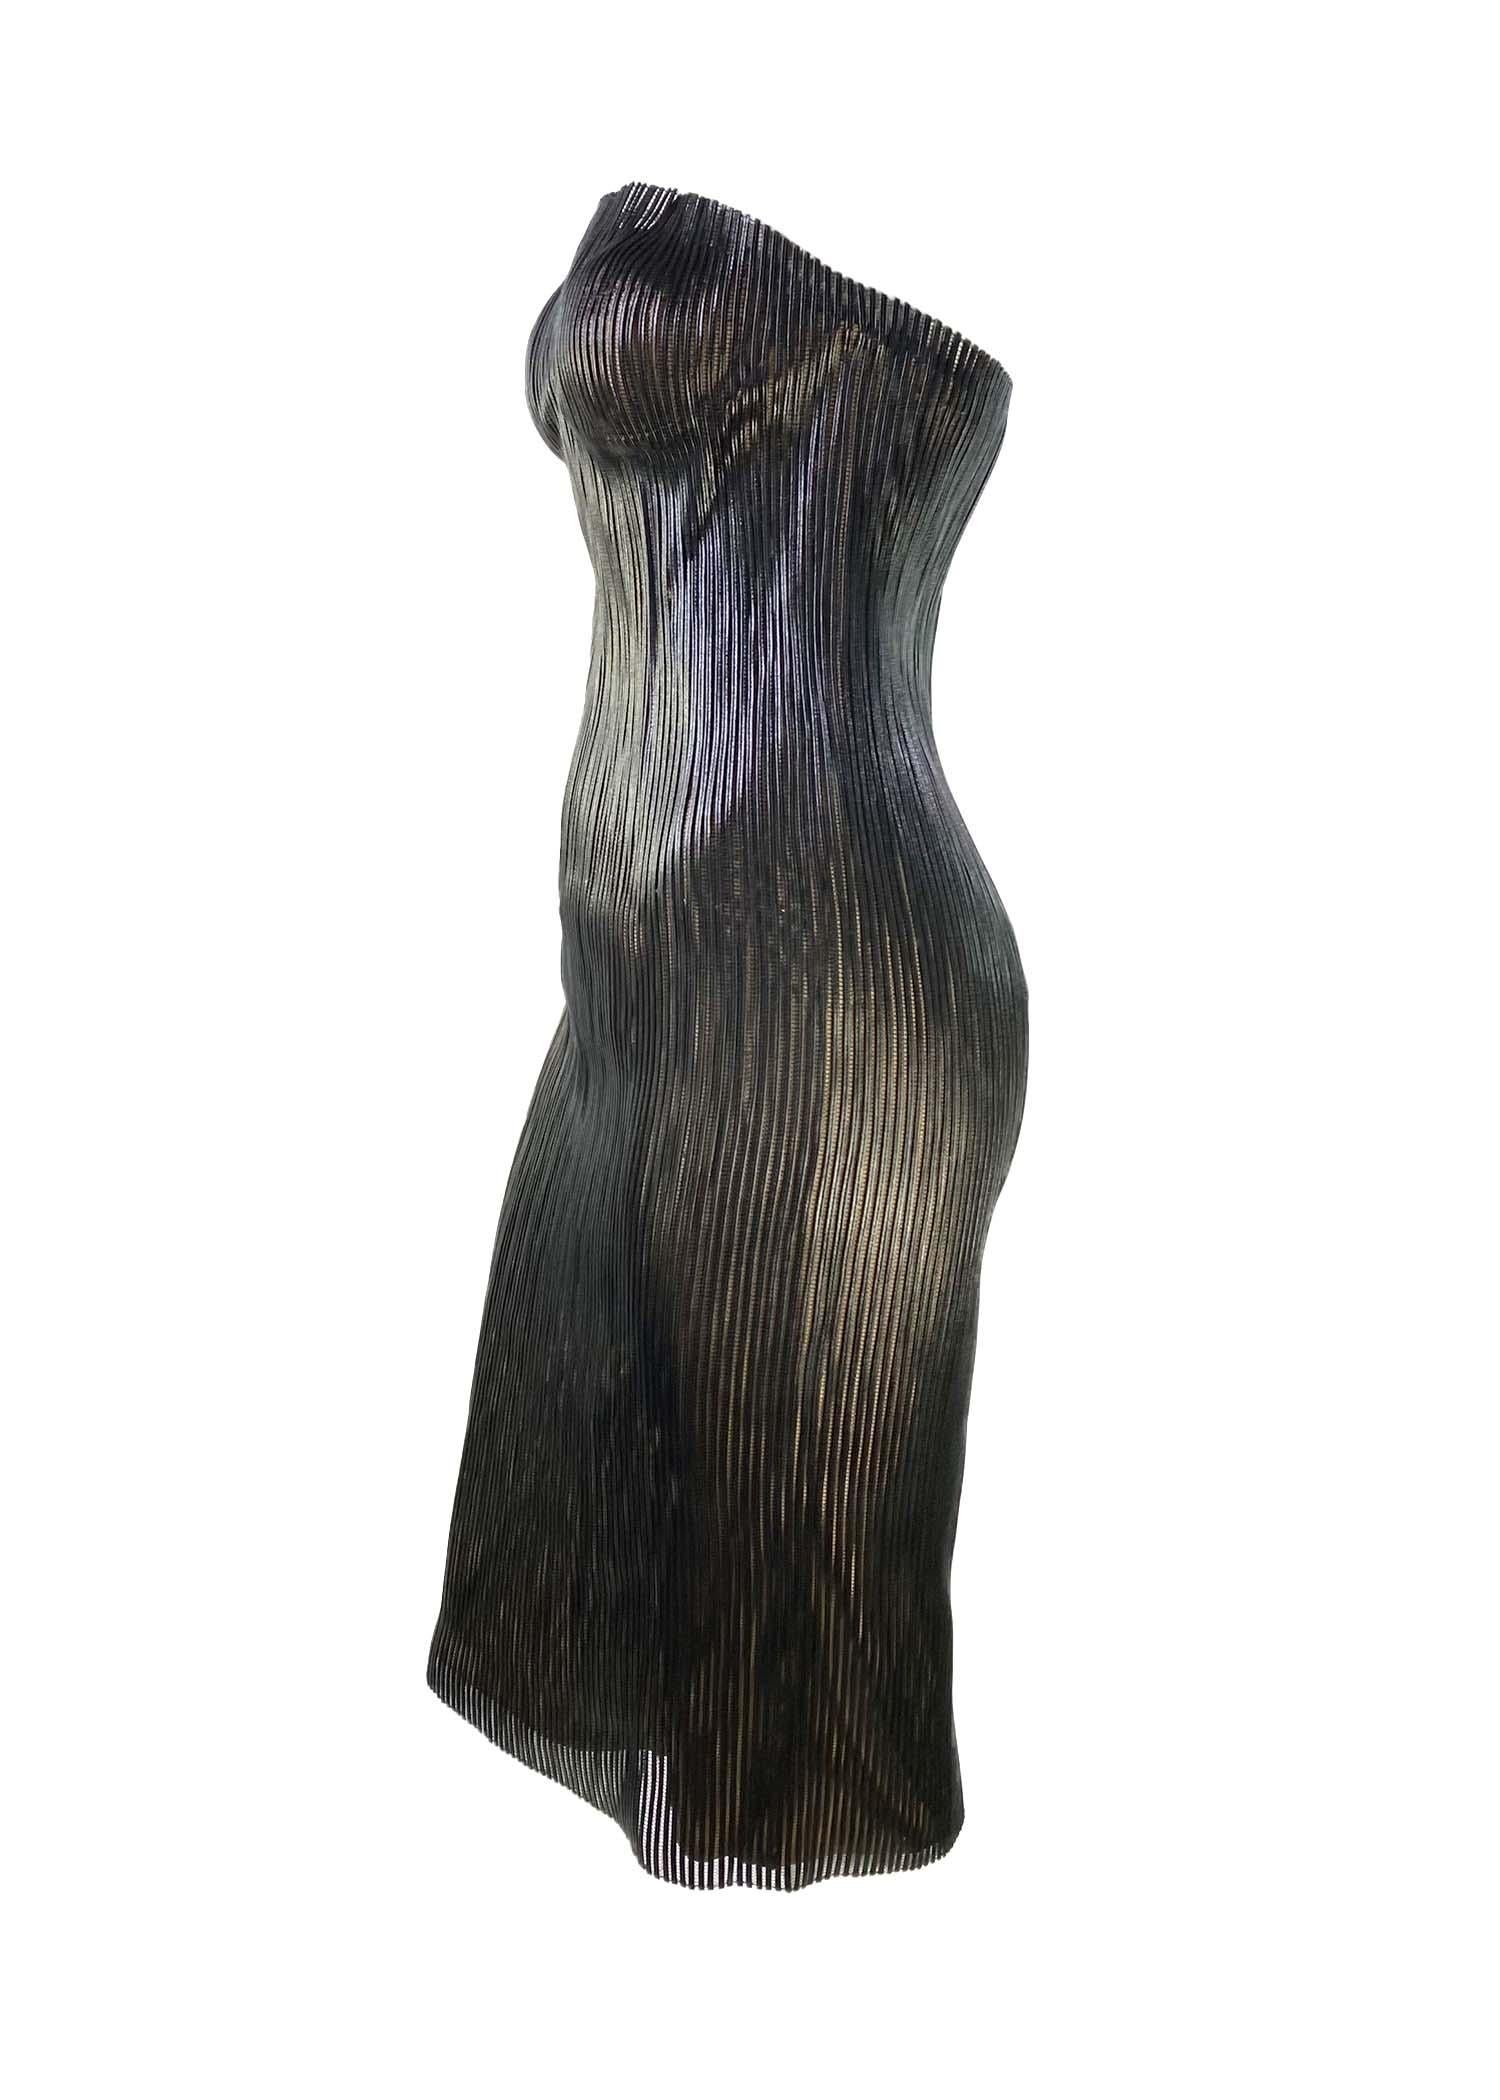 NWT S/S 2001 Gucci by Tom Ford Leather Mesh Corset Runway Tube Dress Excellent état - En vente à West Hollywood, CA